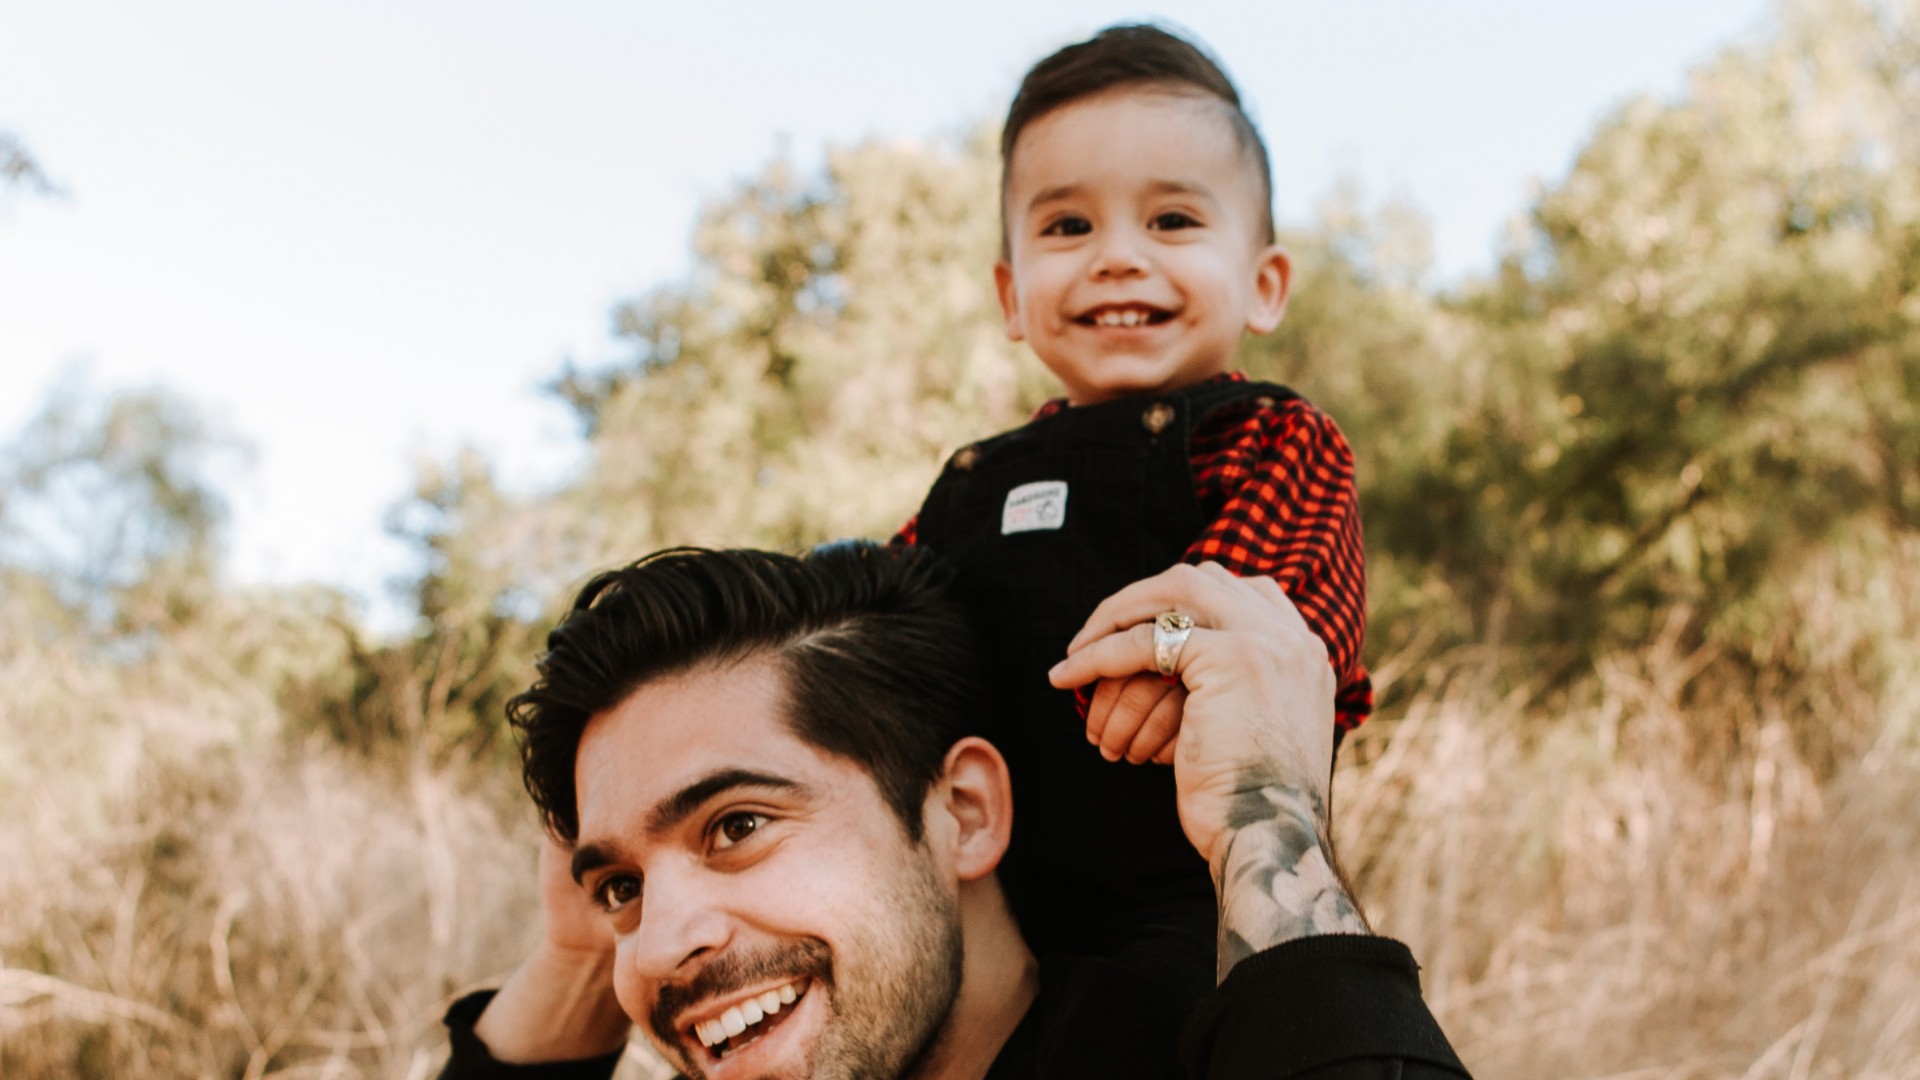 Smiling father carrying his son on his back in a park, Photo by Omar Lopez on Unsplash